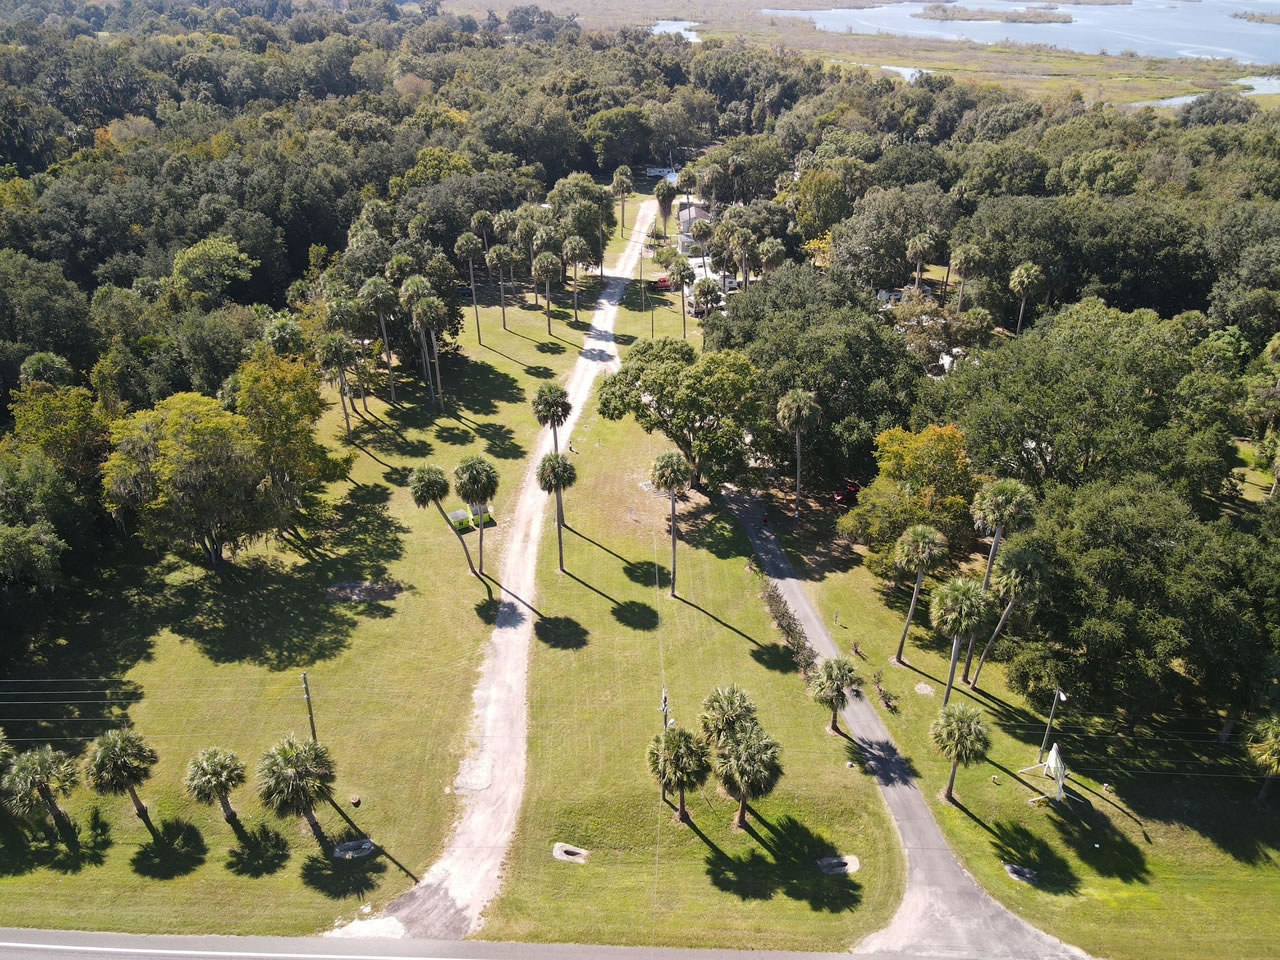 Drone Photo Showing The Park and Orange Lake To The Rear